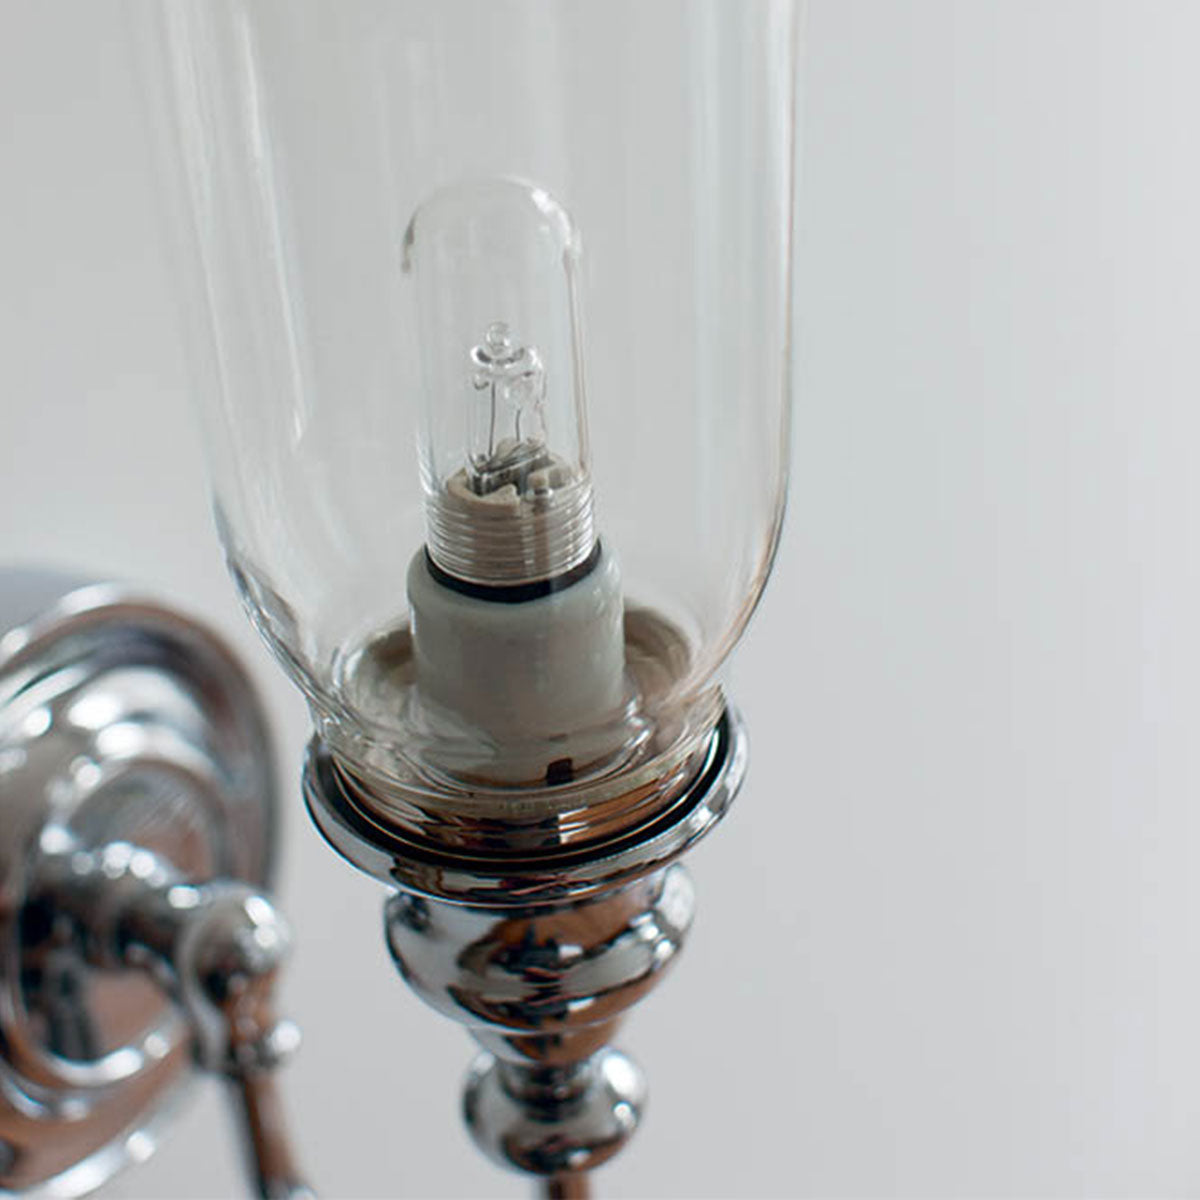 Burlington Ornate Light with Chrome Base and Vase Clear Glass Shade Feature Deluxe Bathrooms UK